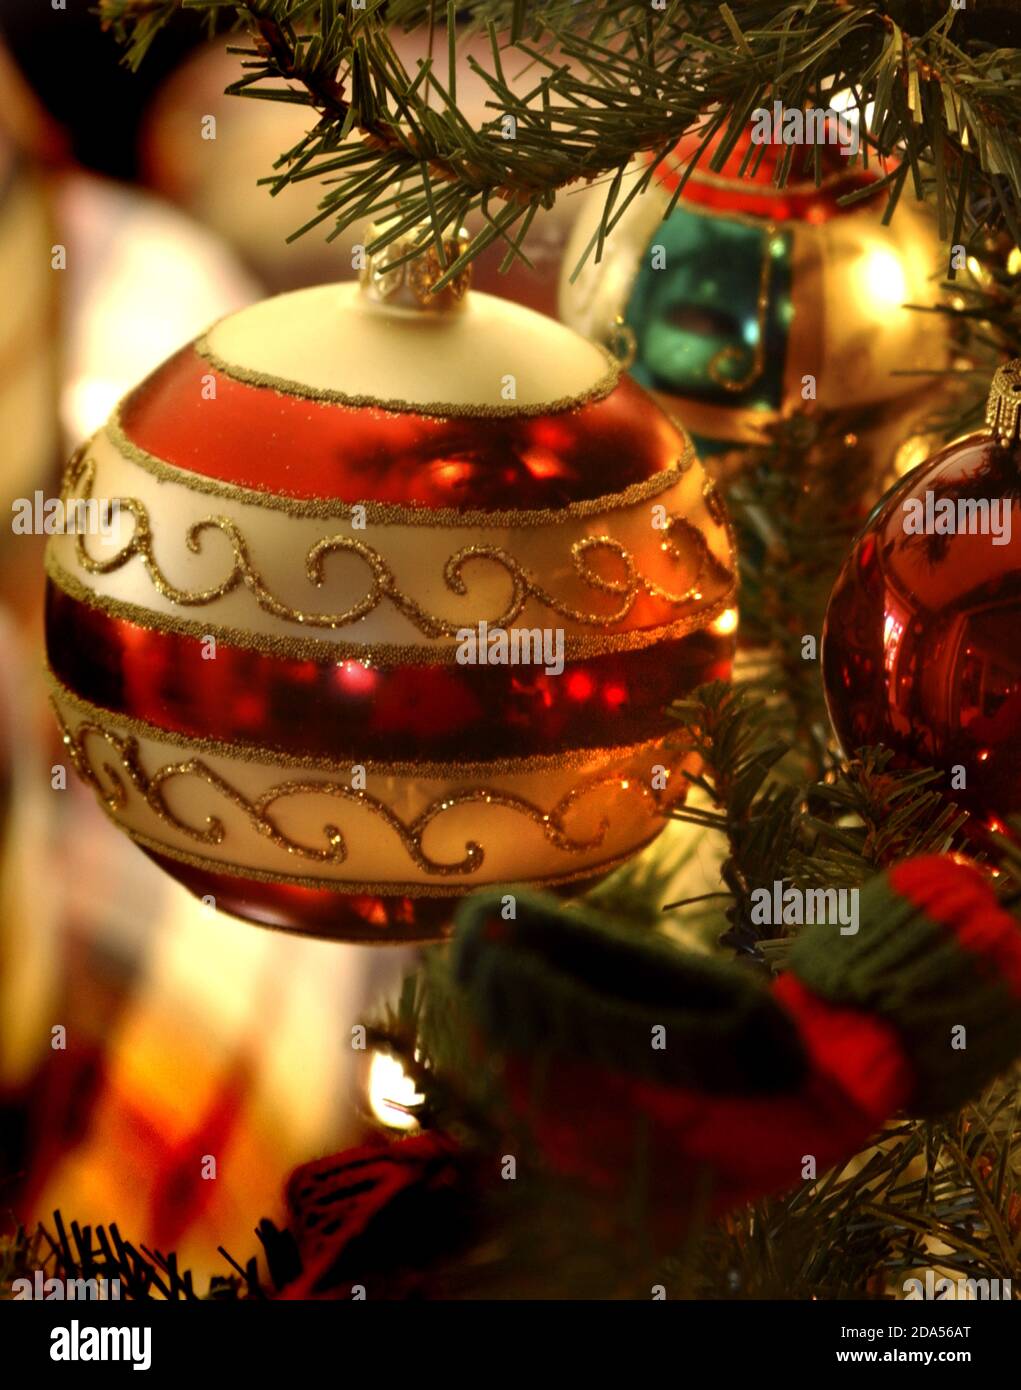 CLOSE-UP OF CHRISTMAS ORNAMENTS HANGING ON TREE Stock Photo